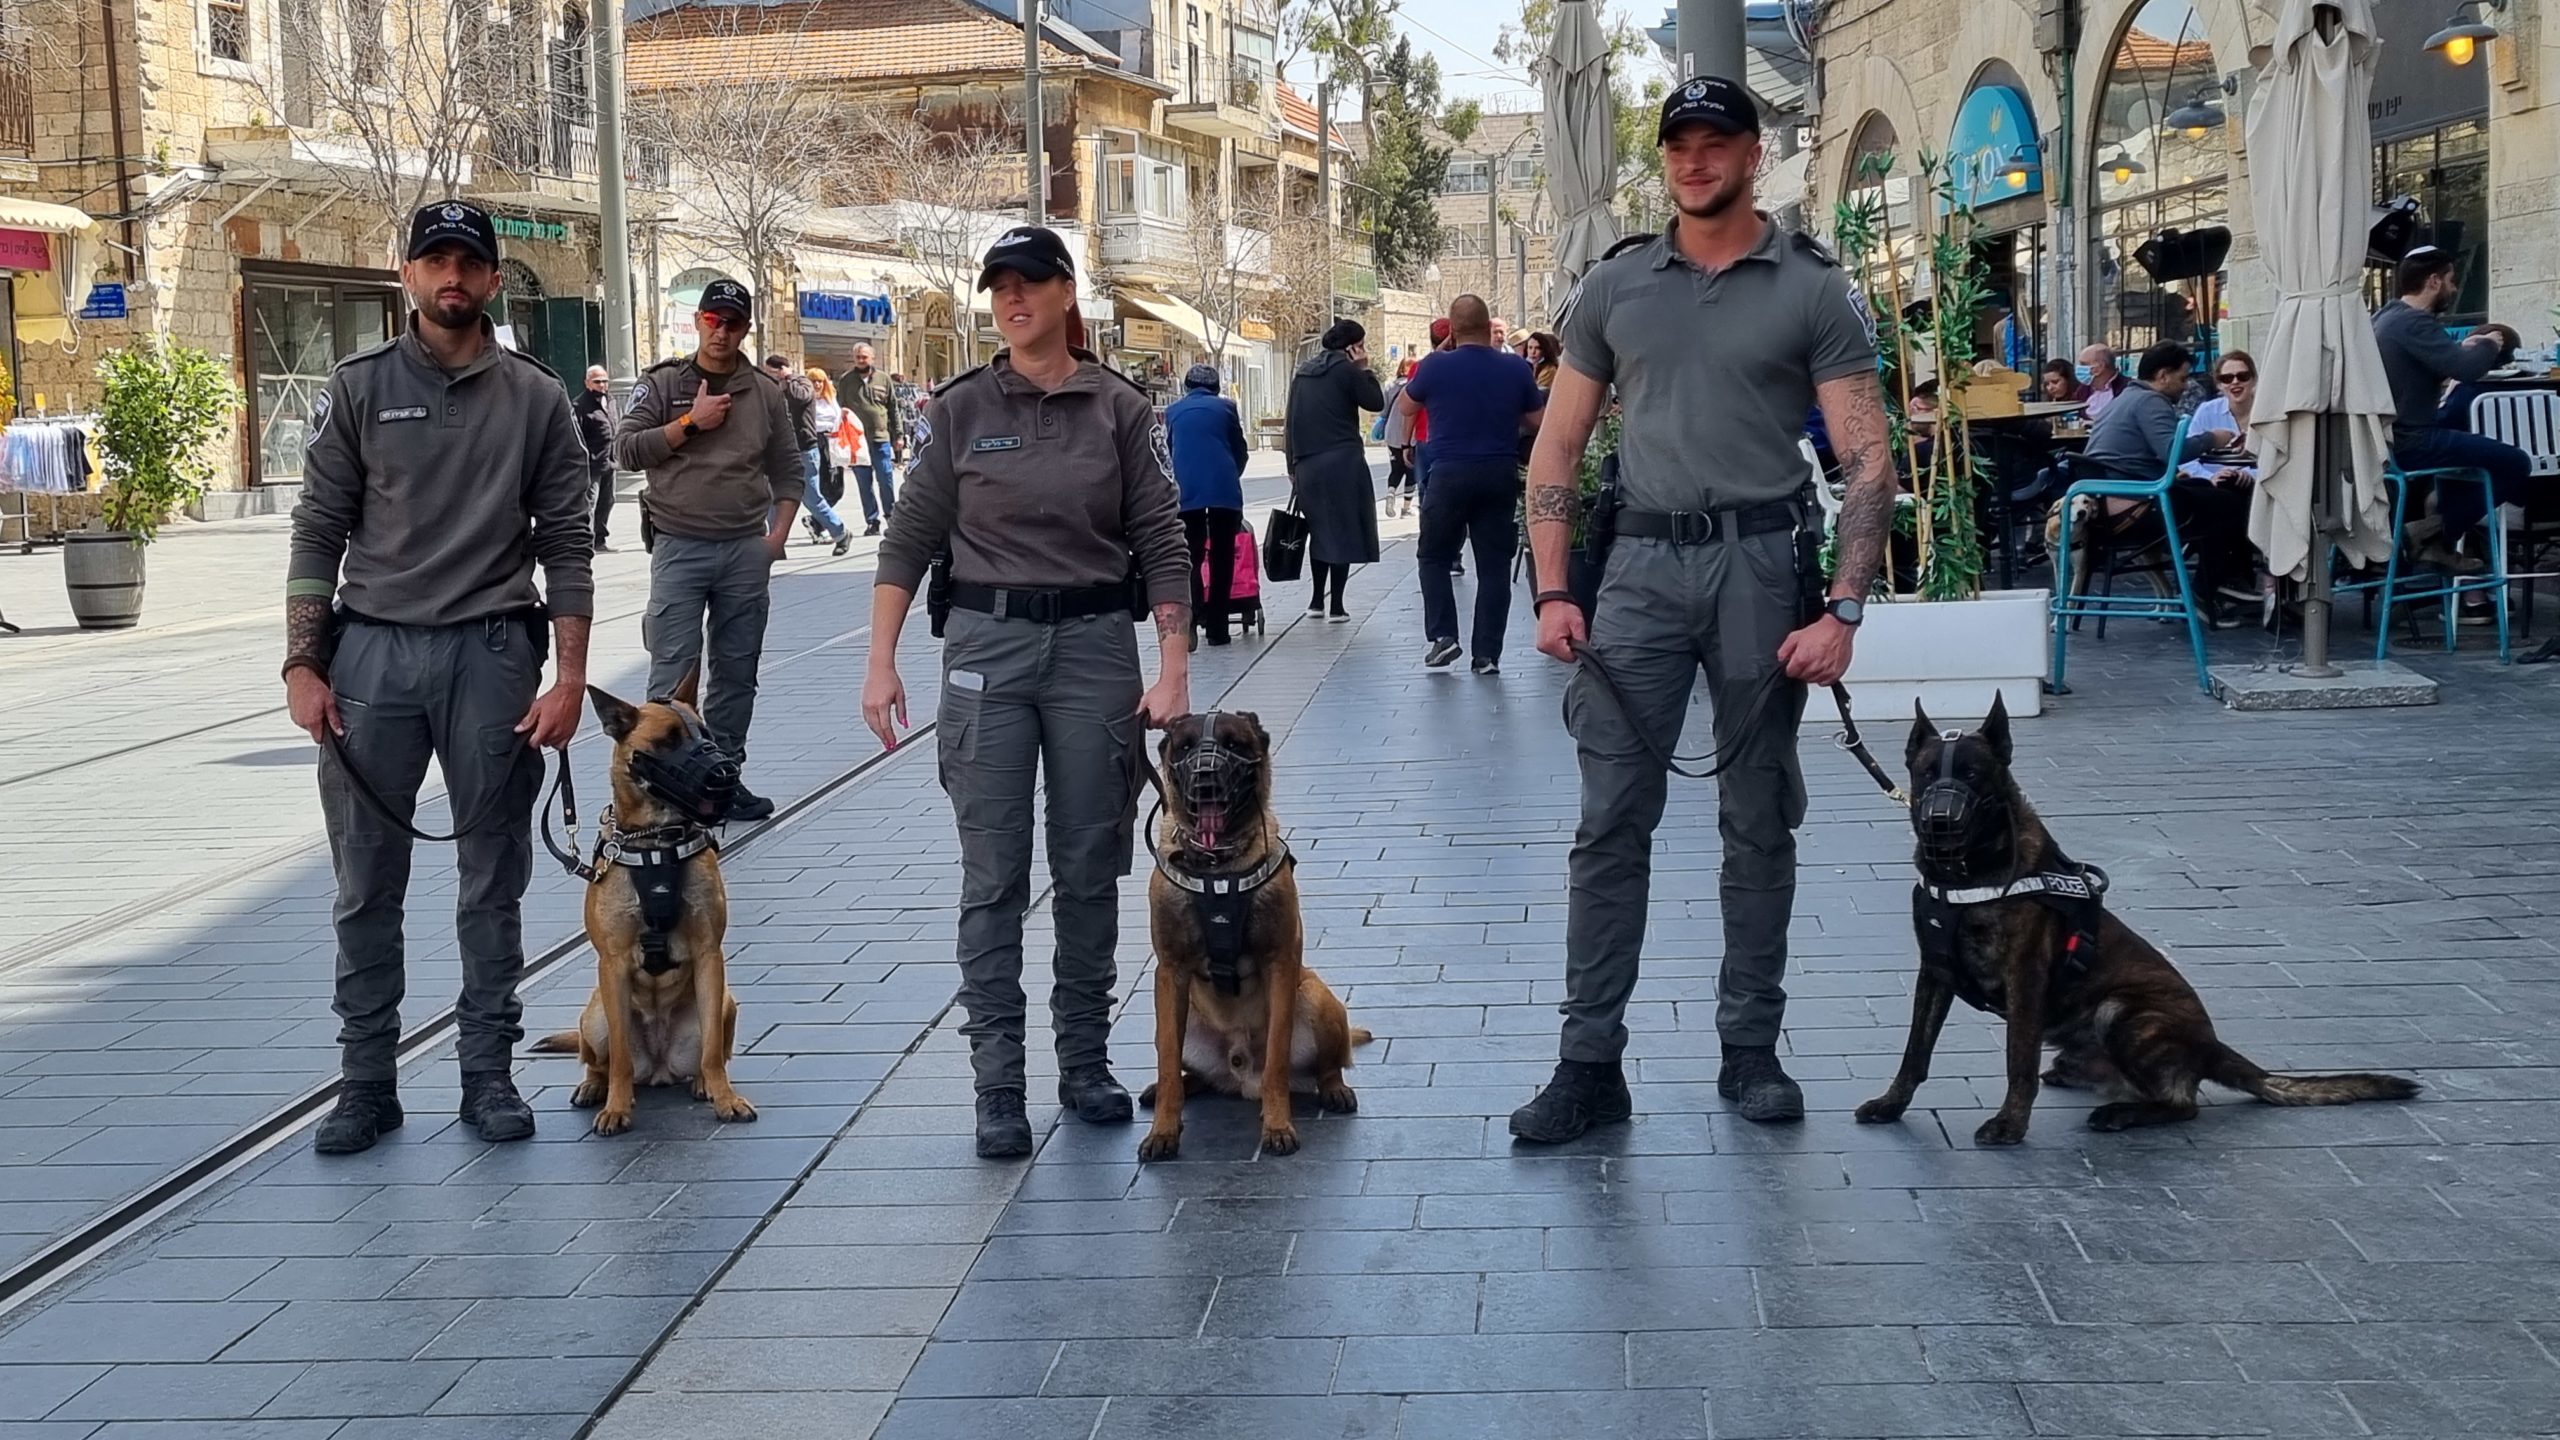 ‘We Are Strong:’ Israelis Undeterred by Wave of Terror (VIDEO REPORT)